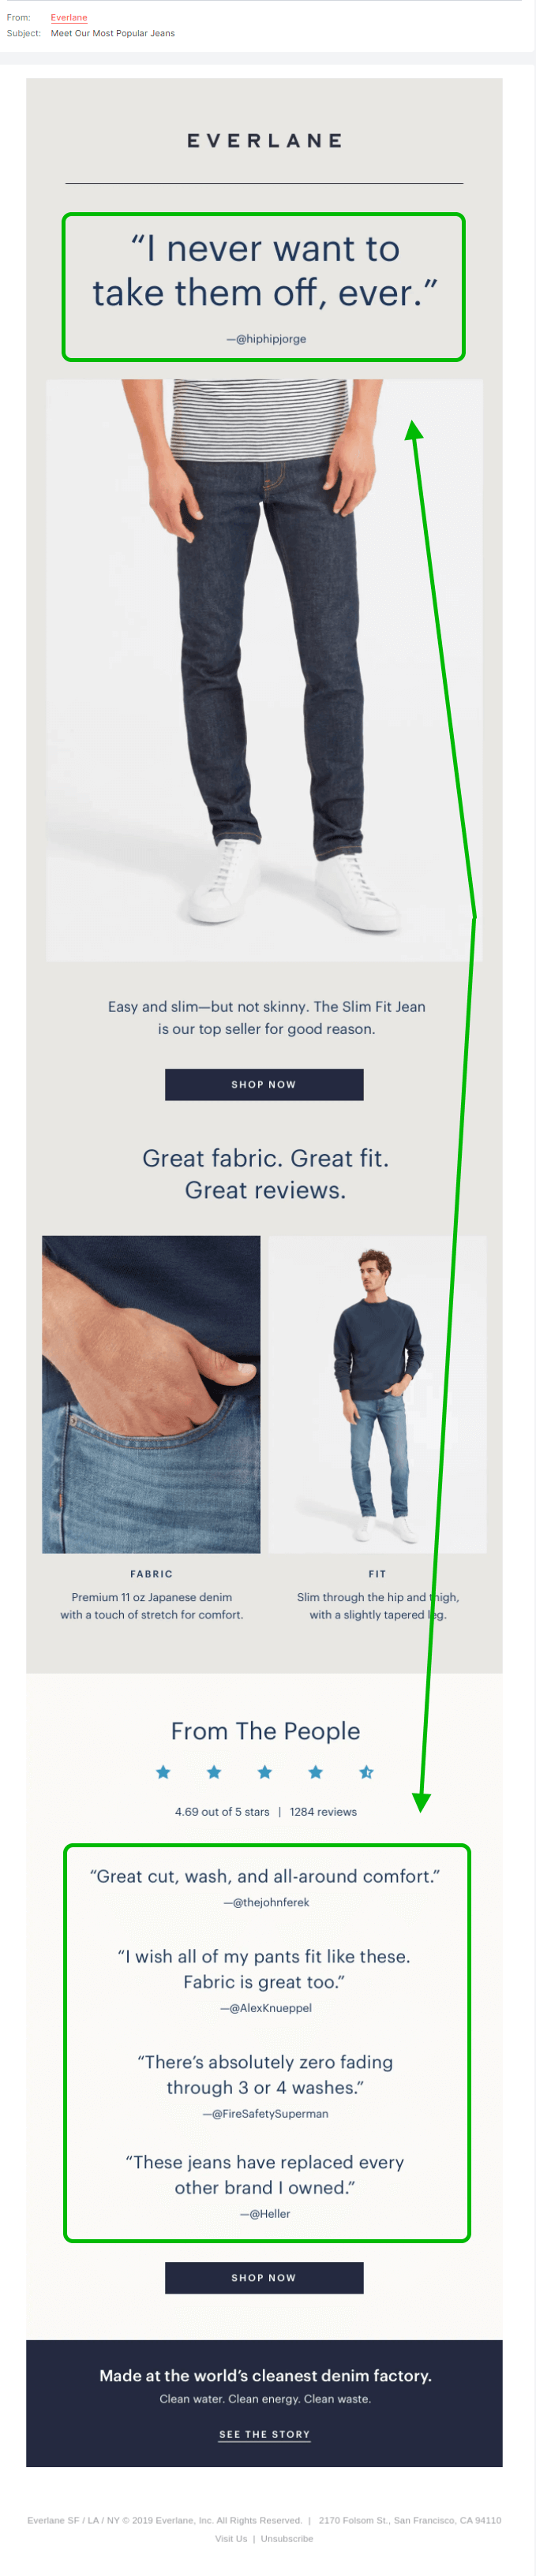 Blockquotes in Everlane’s email